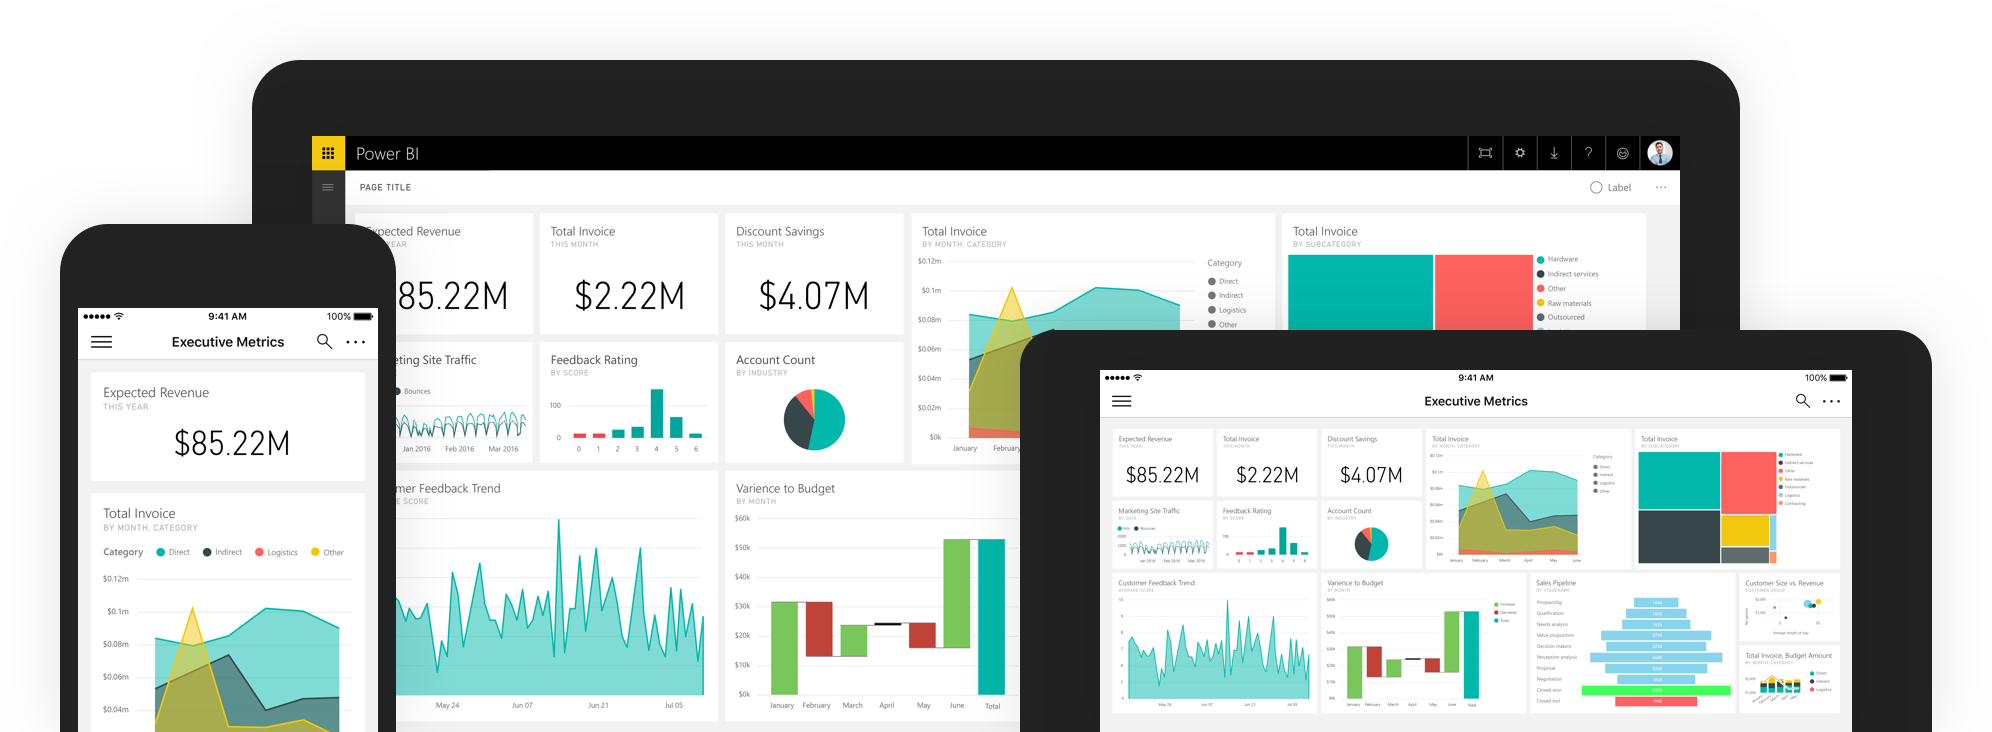 Power Bi example on devices